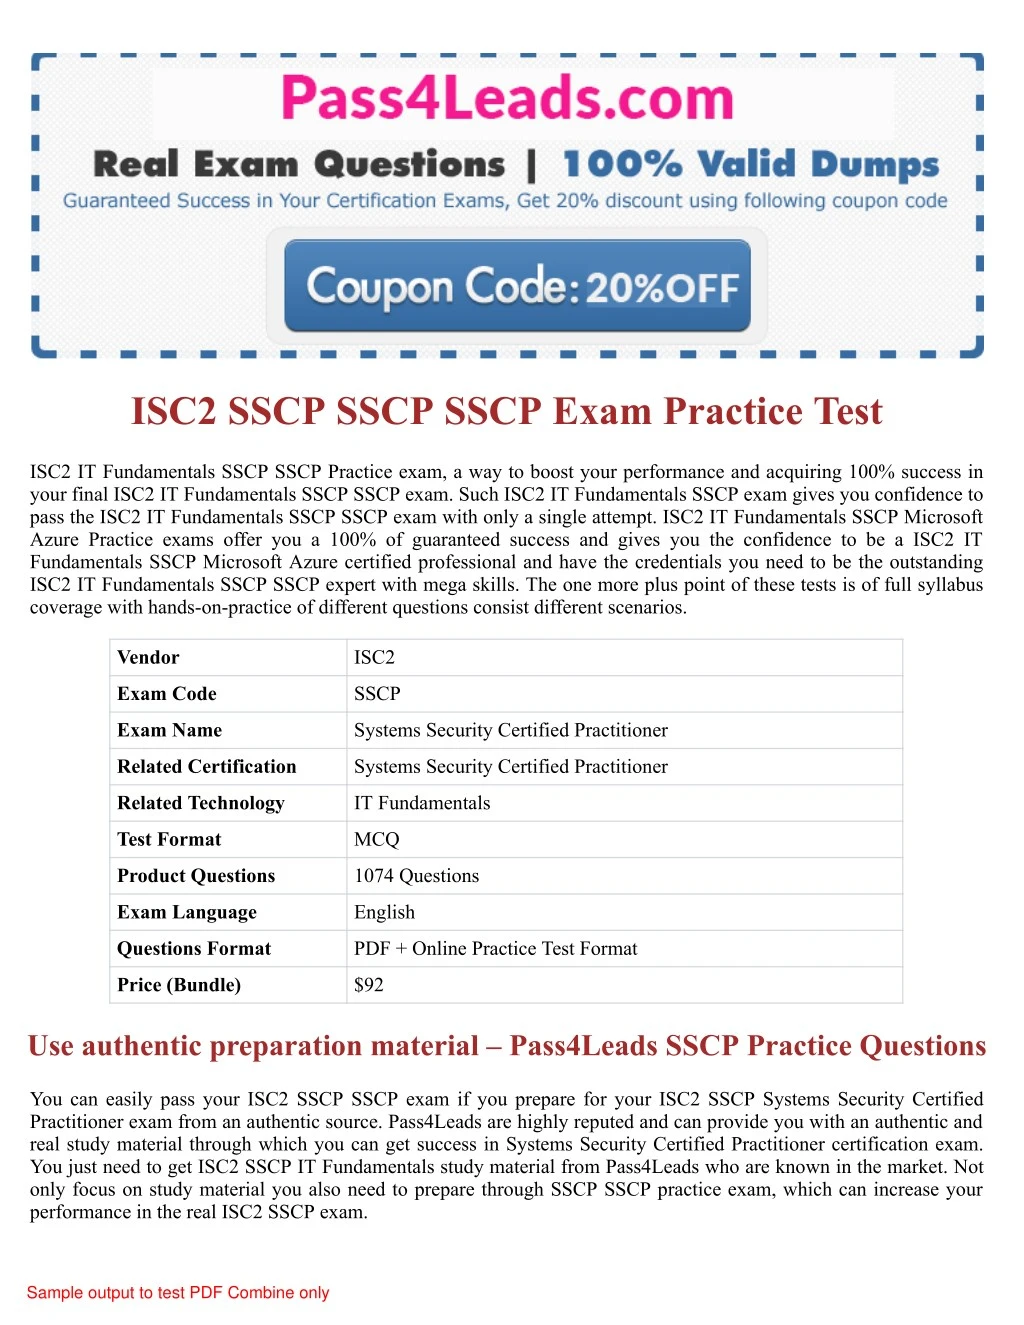 isc2 sscp sscp sscp exam practice test